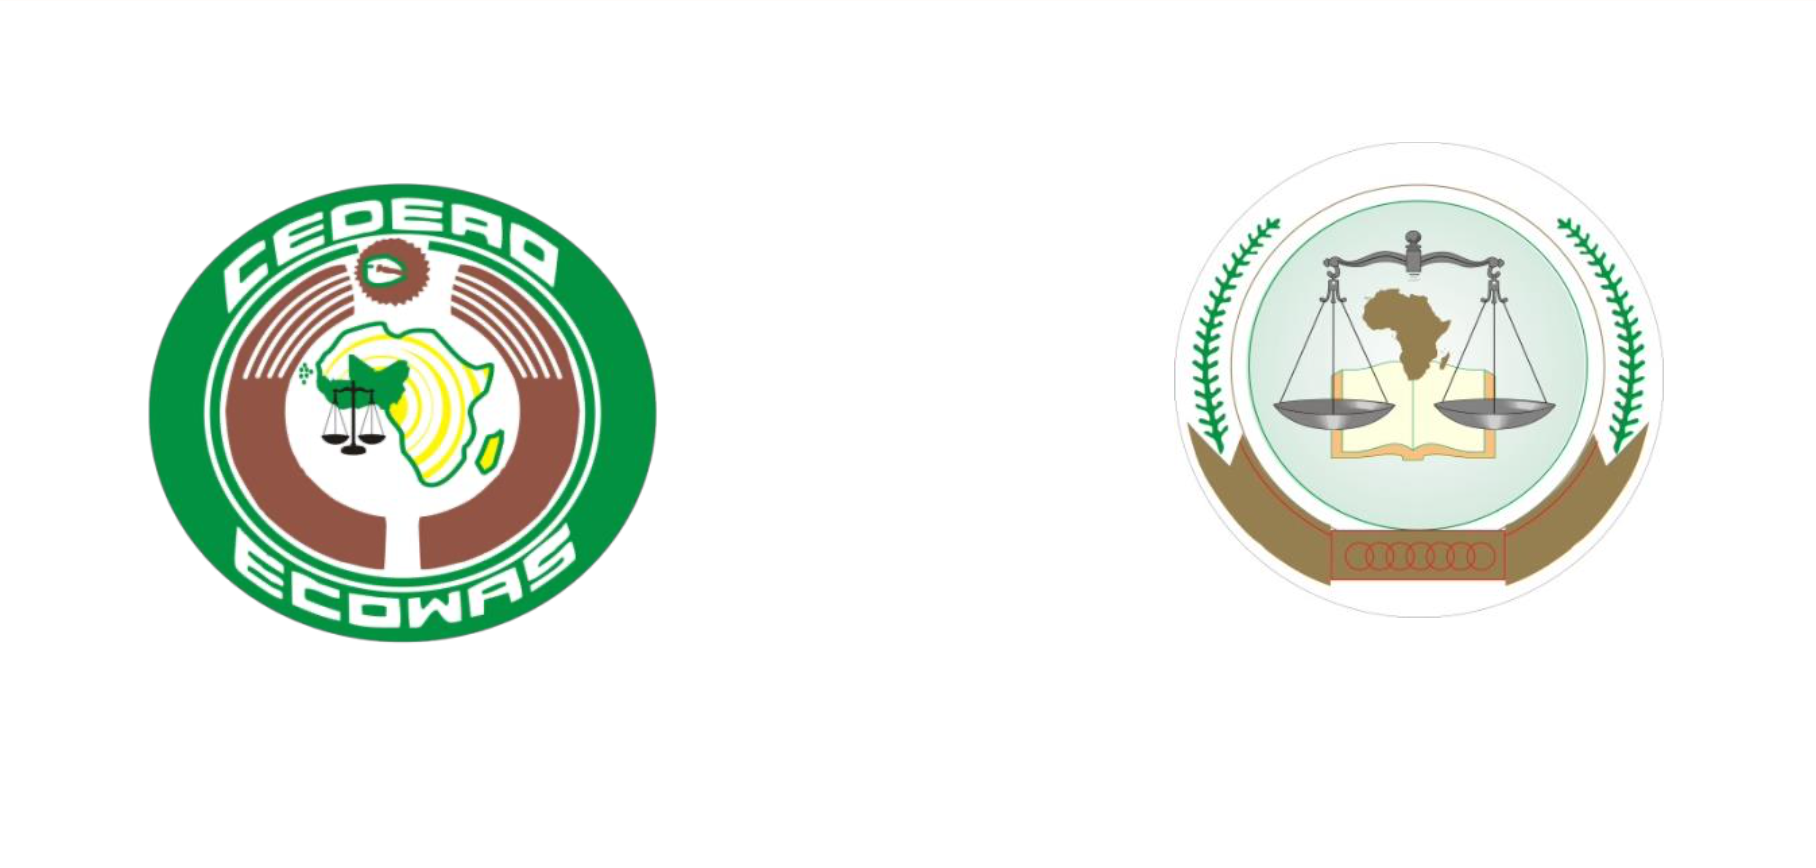 JOINT COMMUNIQUE OF THE AFRICAN COURT ON HUMAN AND PEOPLES' RIGHTS AND THE COMMUNITY COURT OF JUSTICE, ECOWAS